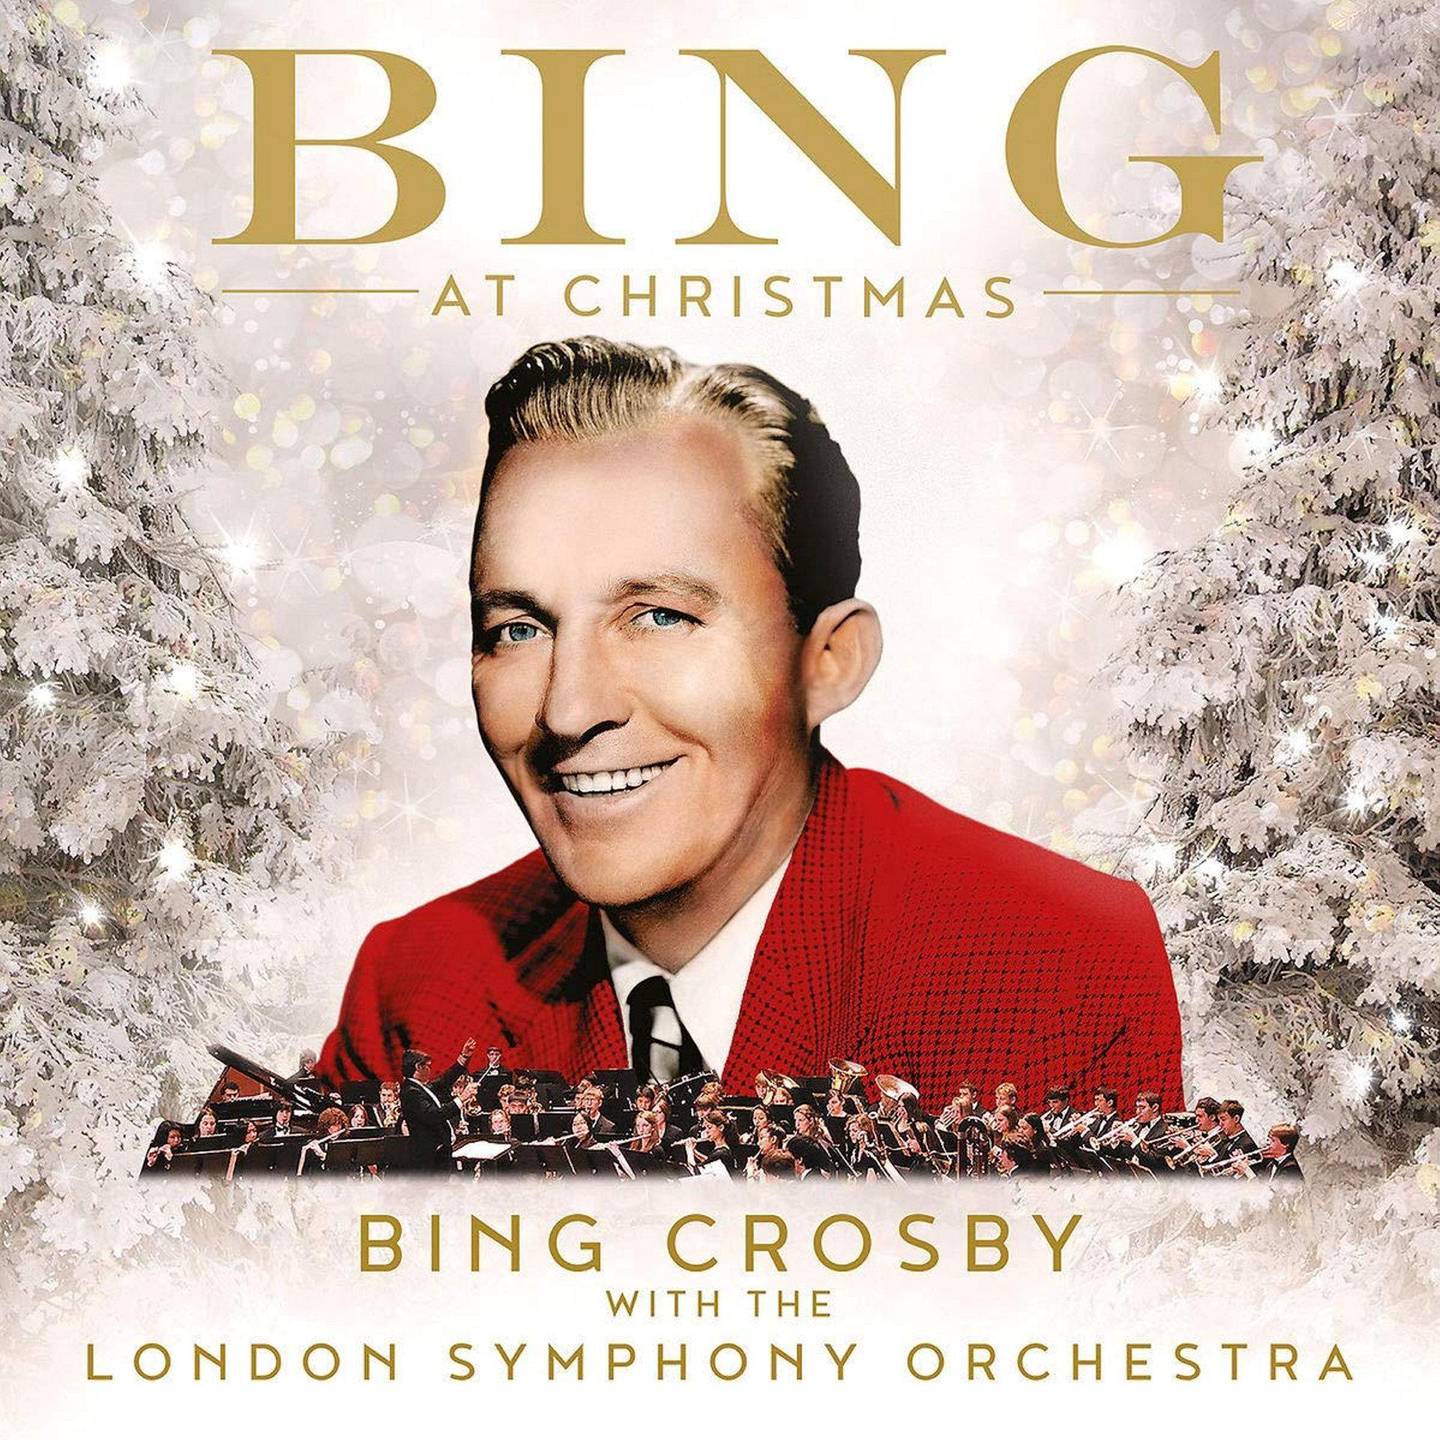 Bing Crosby with The London Symphony Orchestra,KUL Anm Musikk B:«Bing At Christmas»
KUL Anm Musikk C:Verve